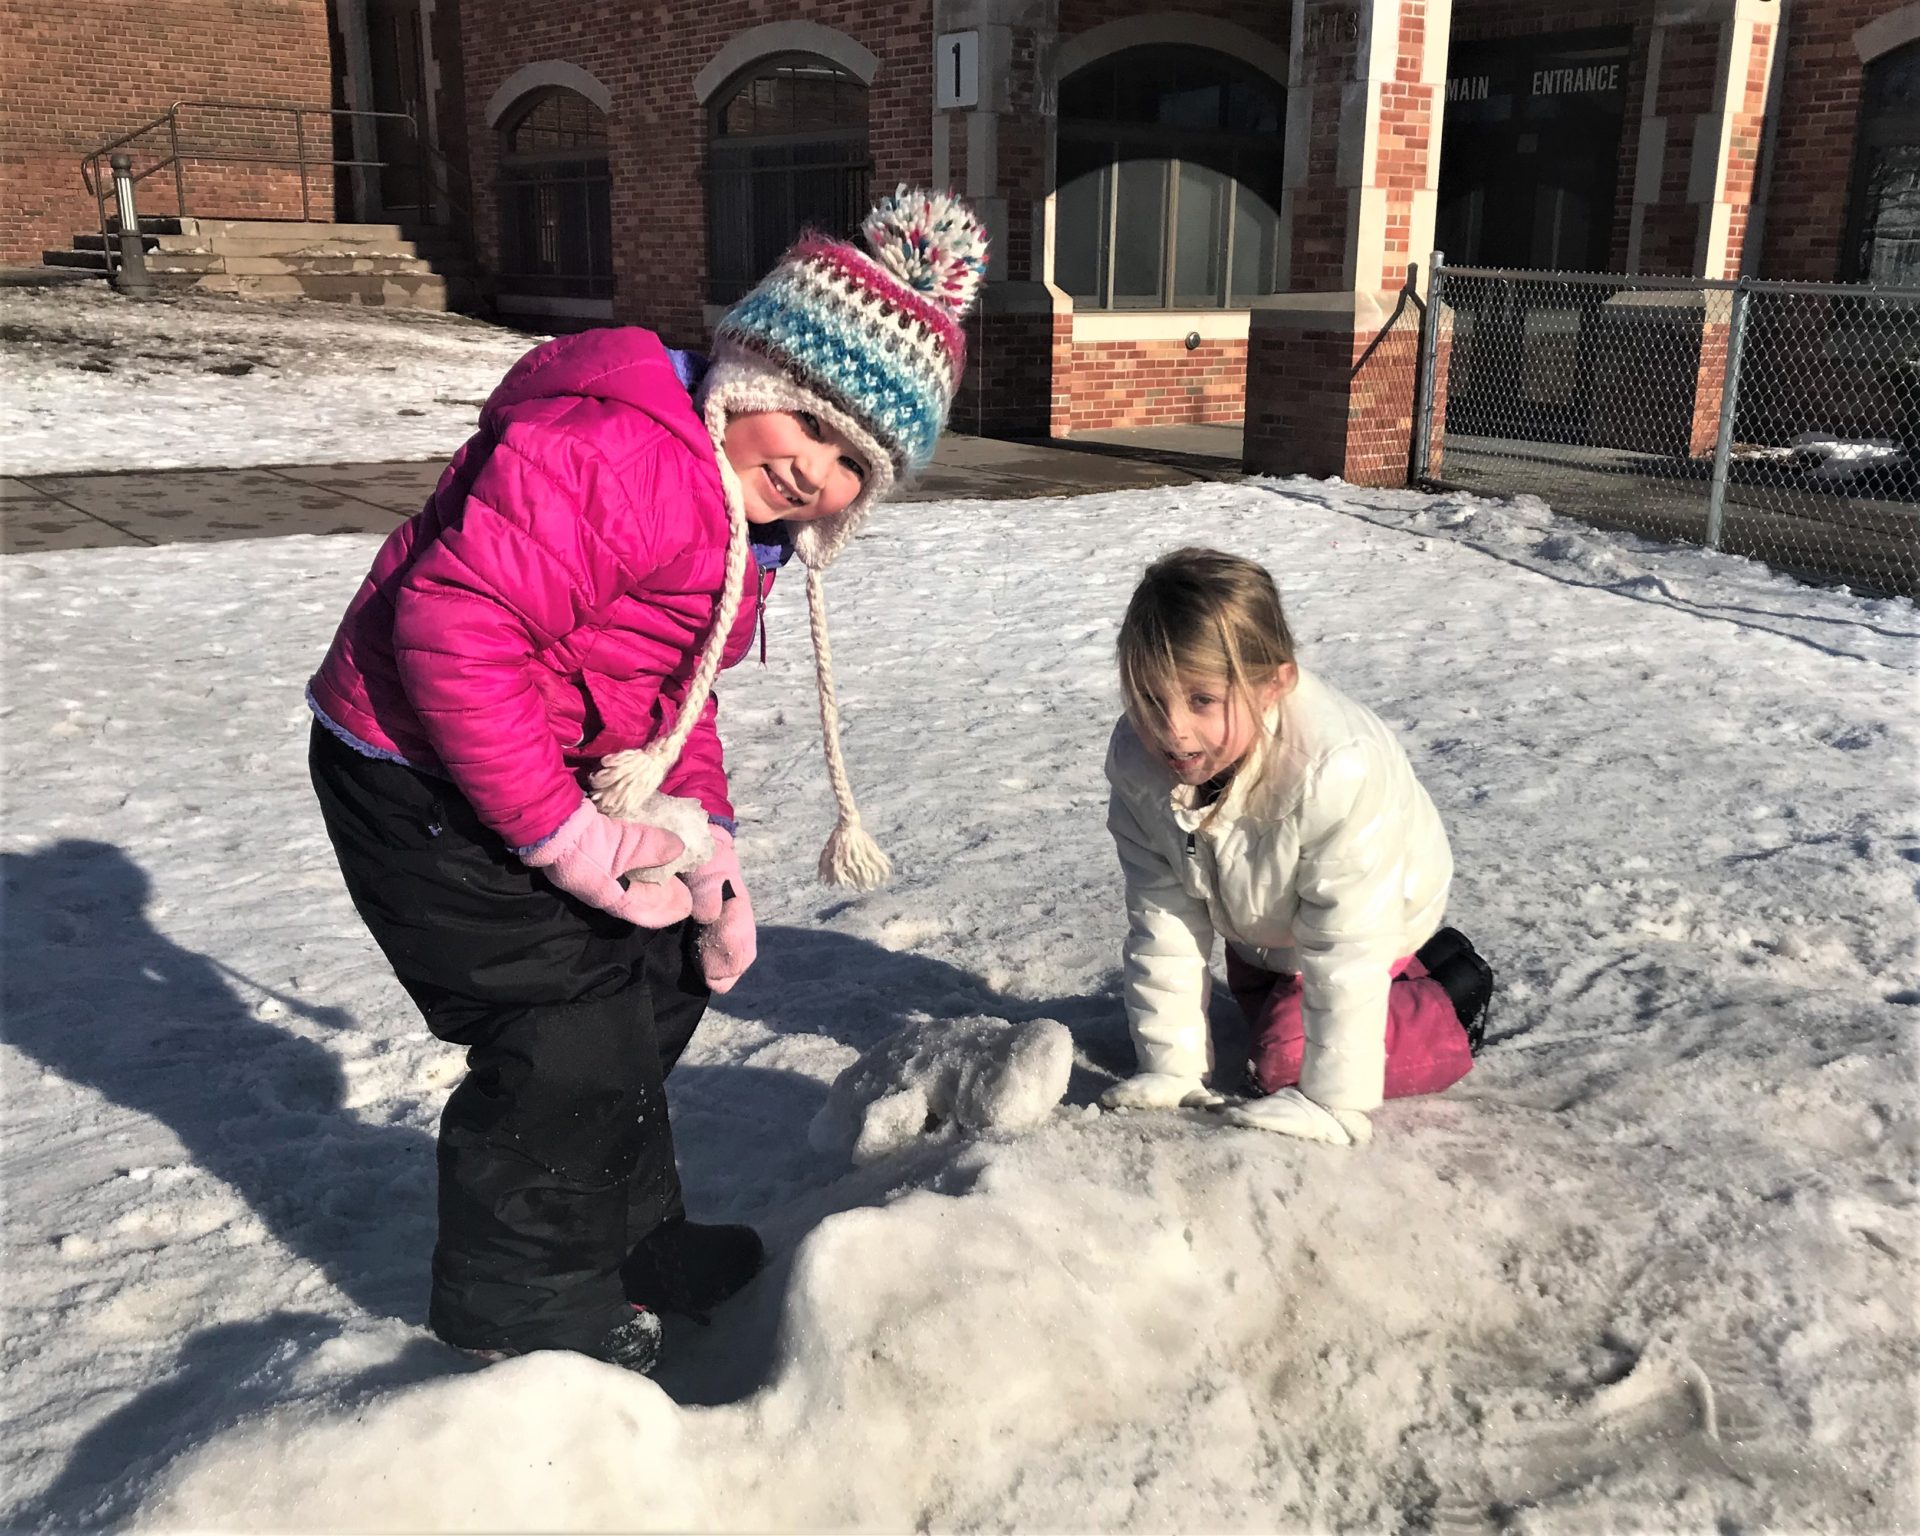 Two girls playing in a snow pile.